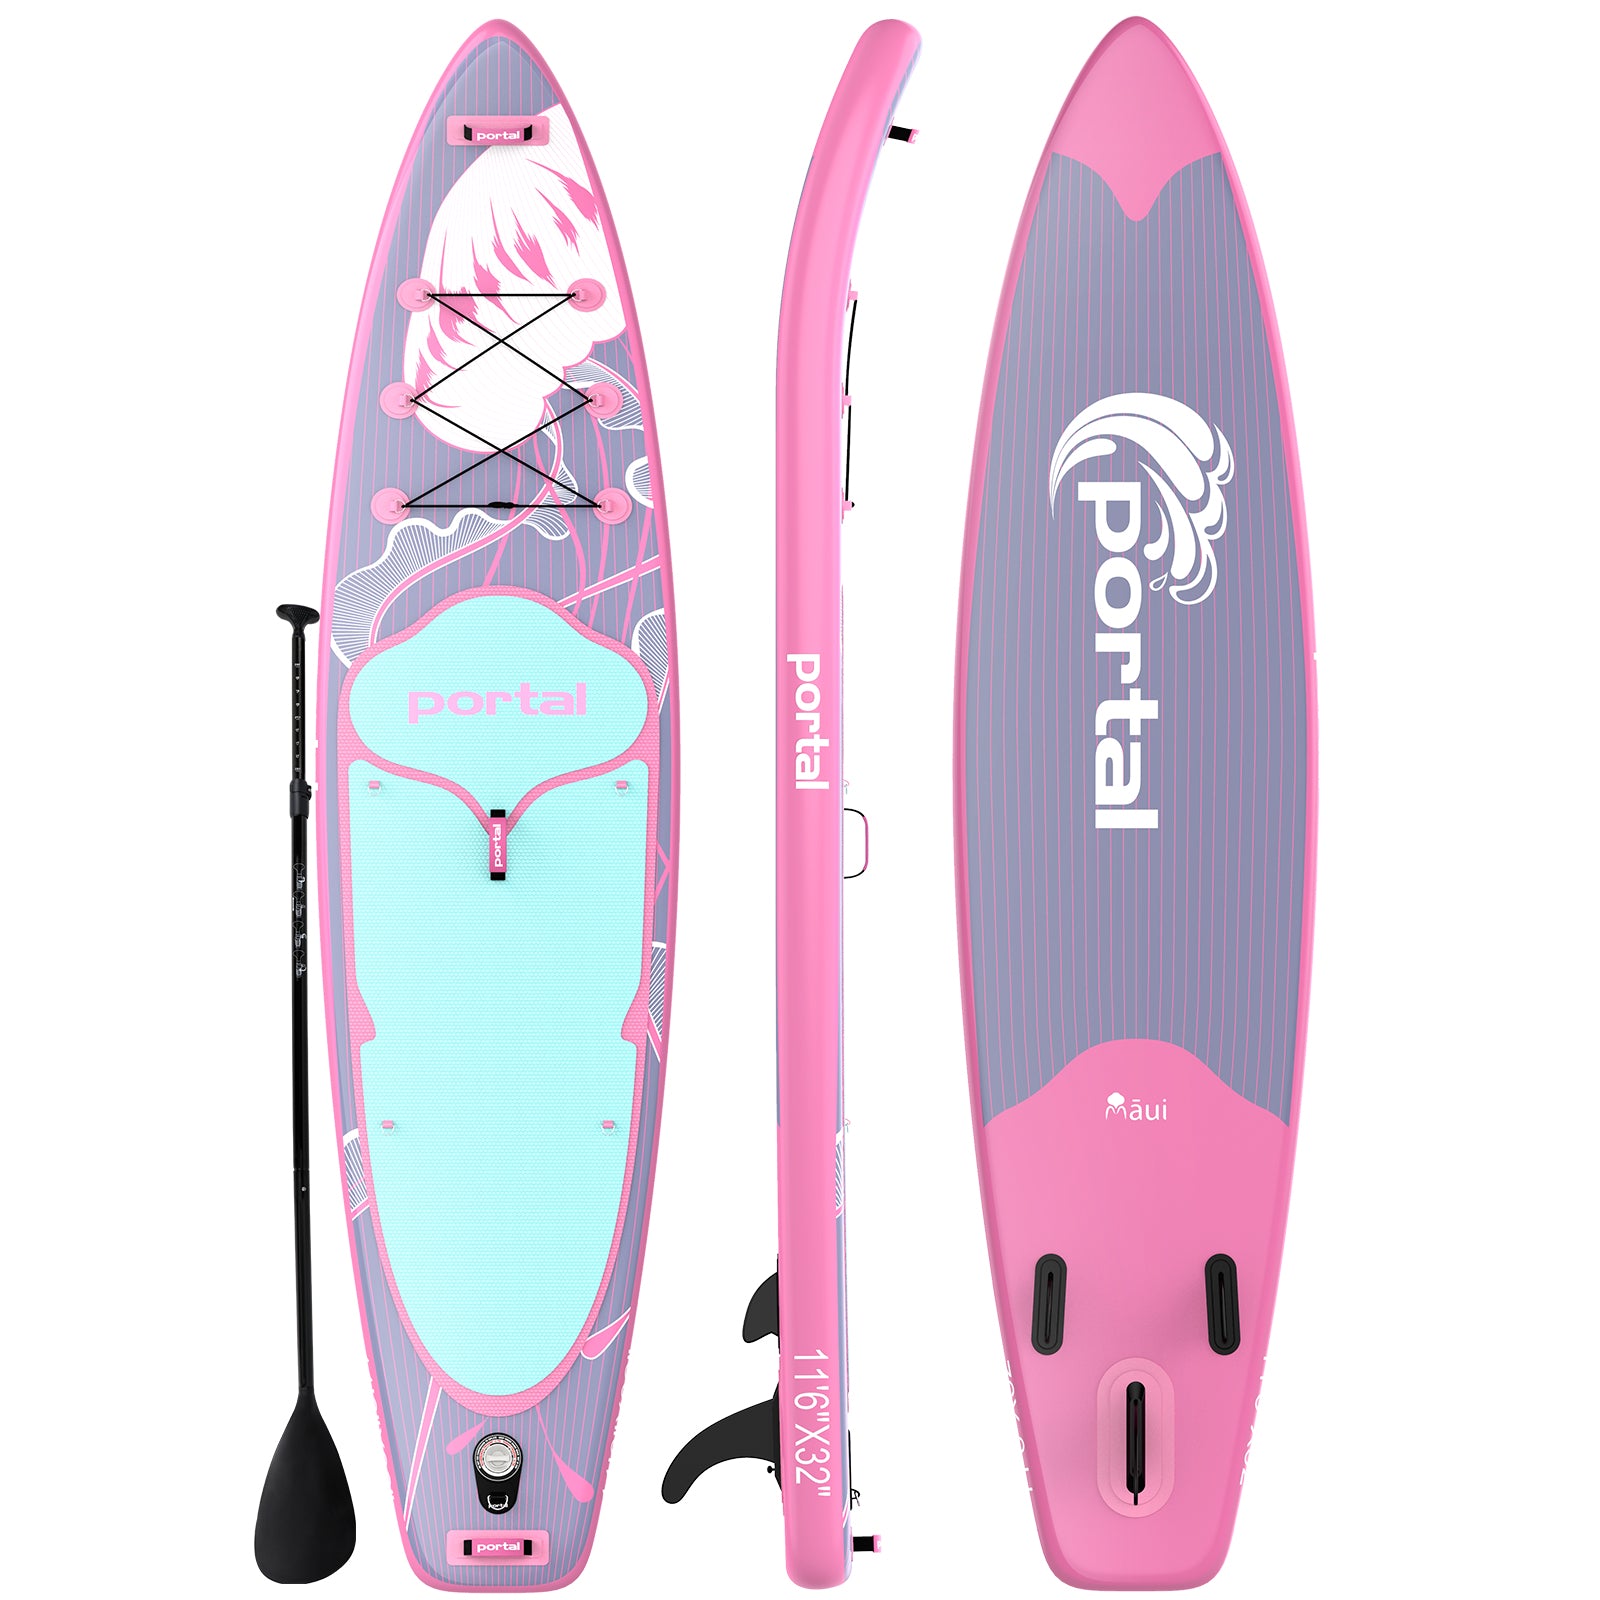 Portal Outdoors Māui Inflatable Stand Up Paddle Board 11'6"x32"x6"